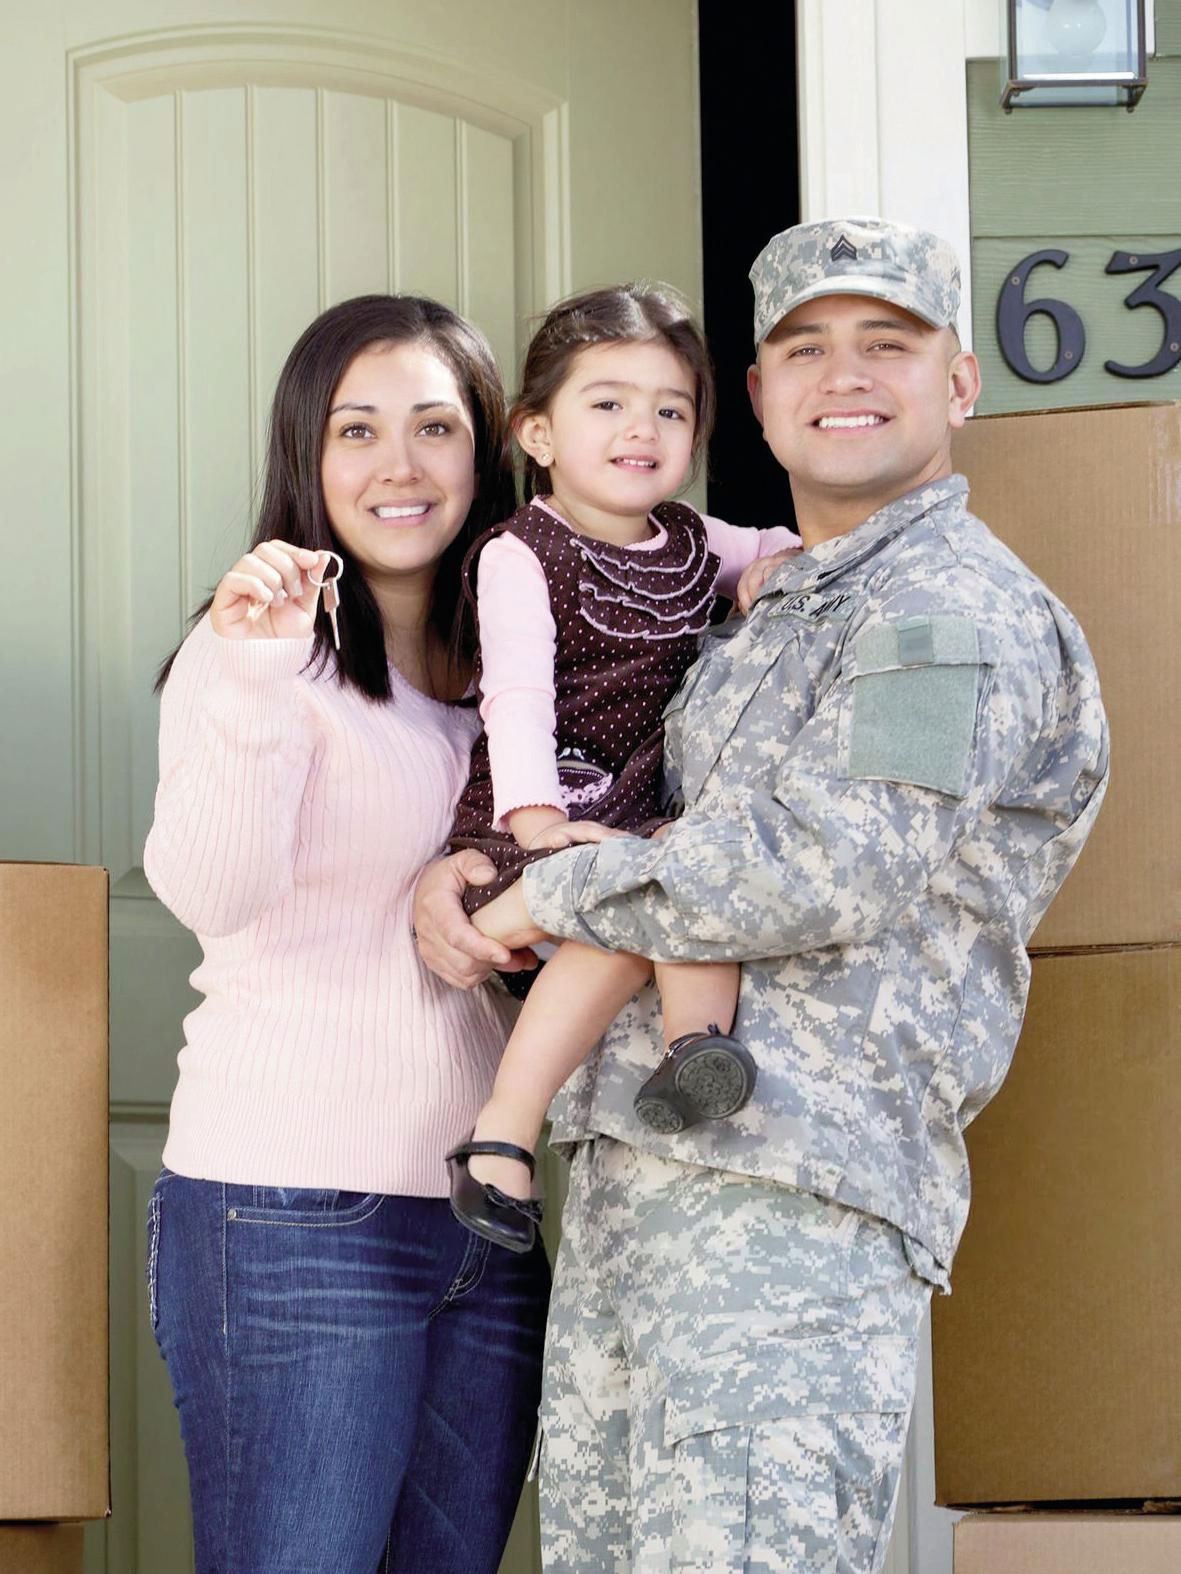 FROM OUR FAMILIES… TO YOUR FAMILIES MILITARY SECTION